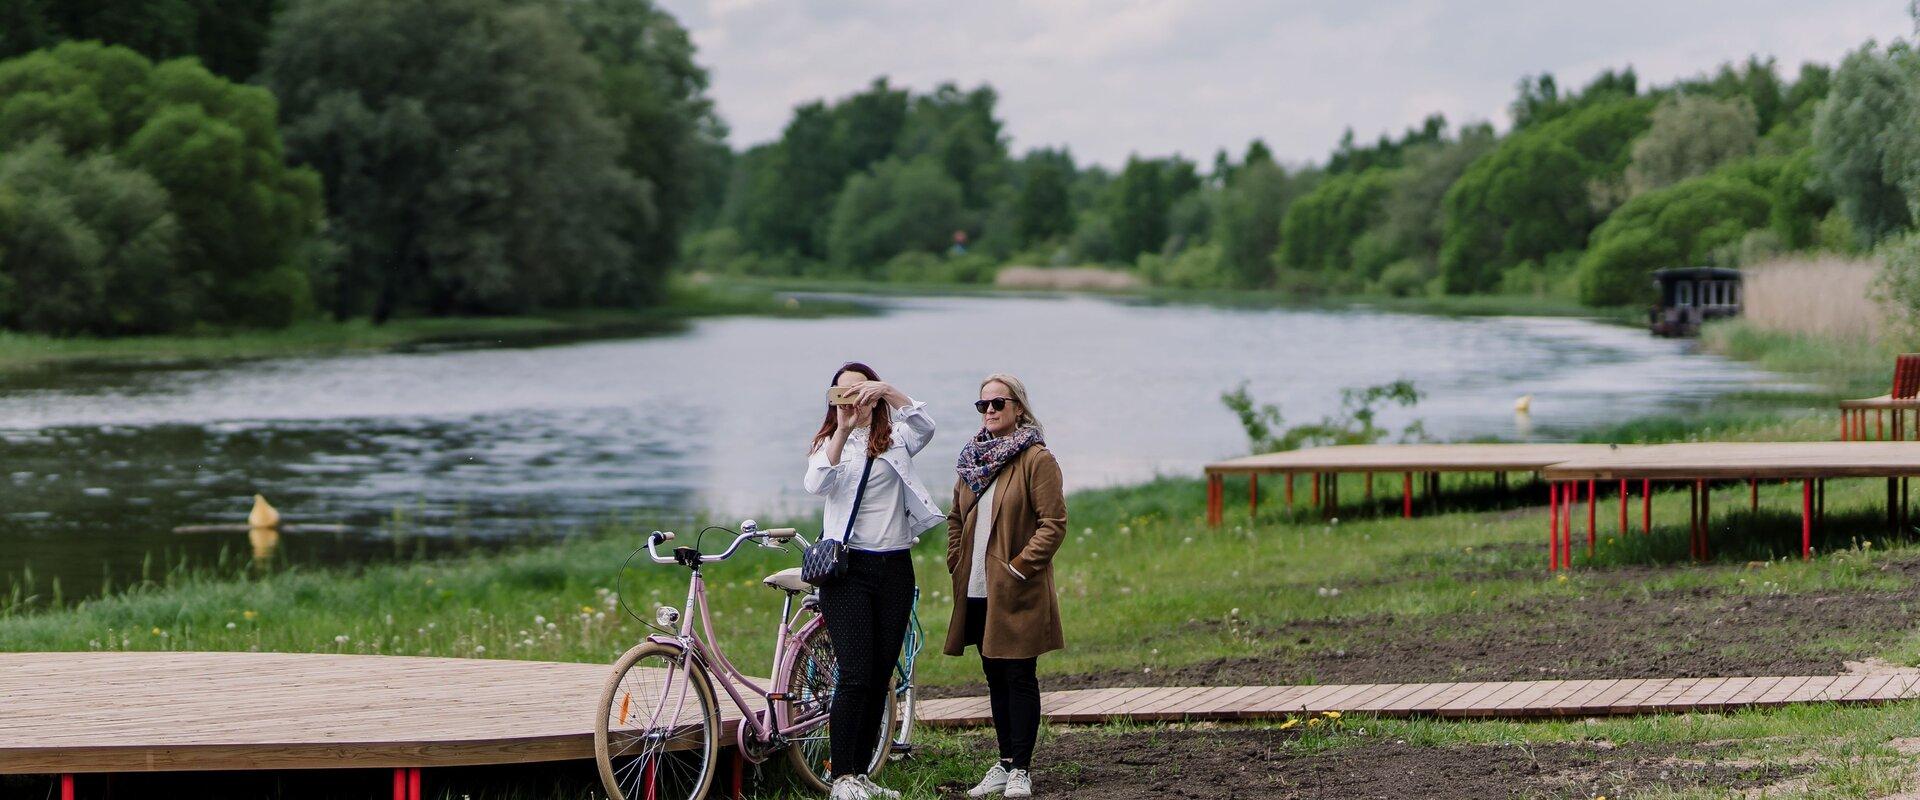 Emajõe City Beach and ladies with a bicycle